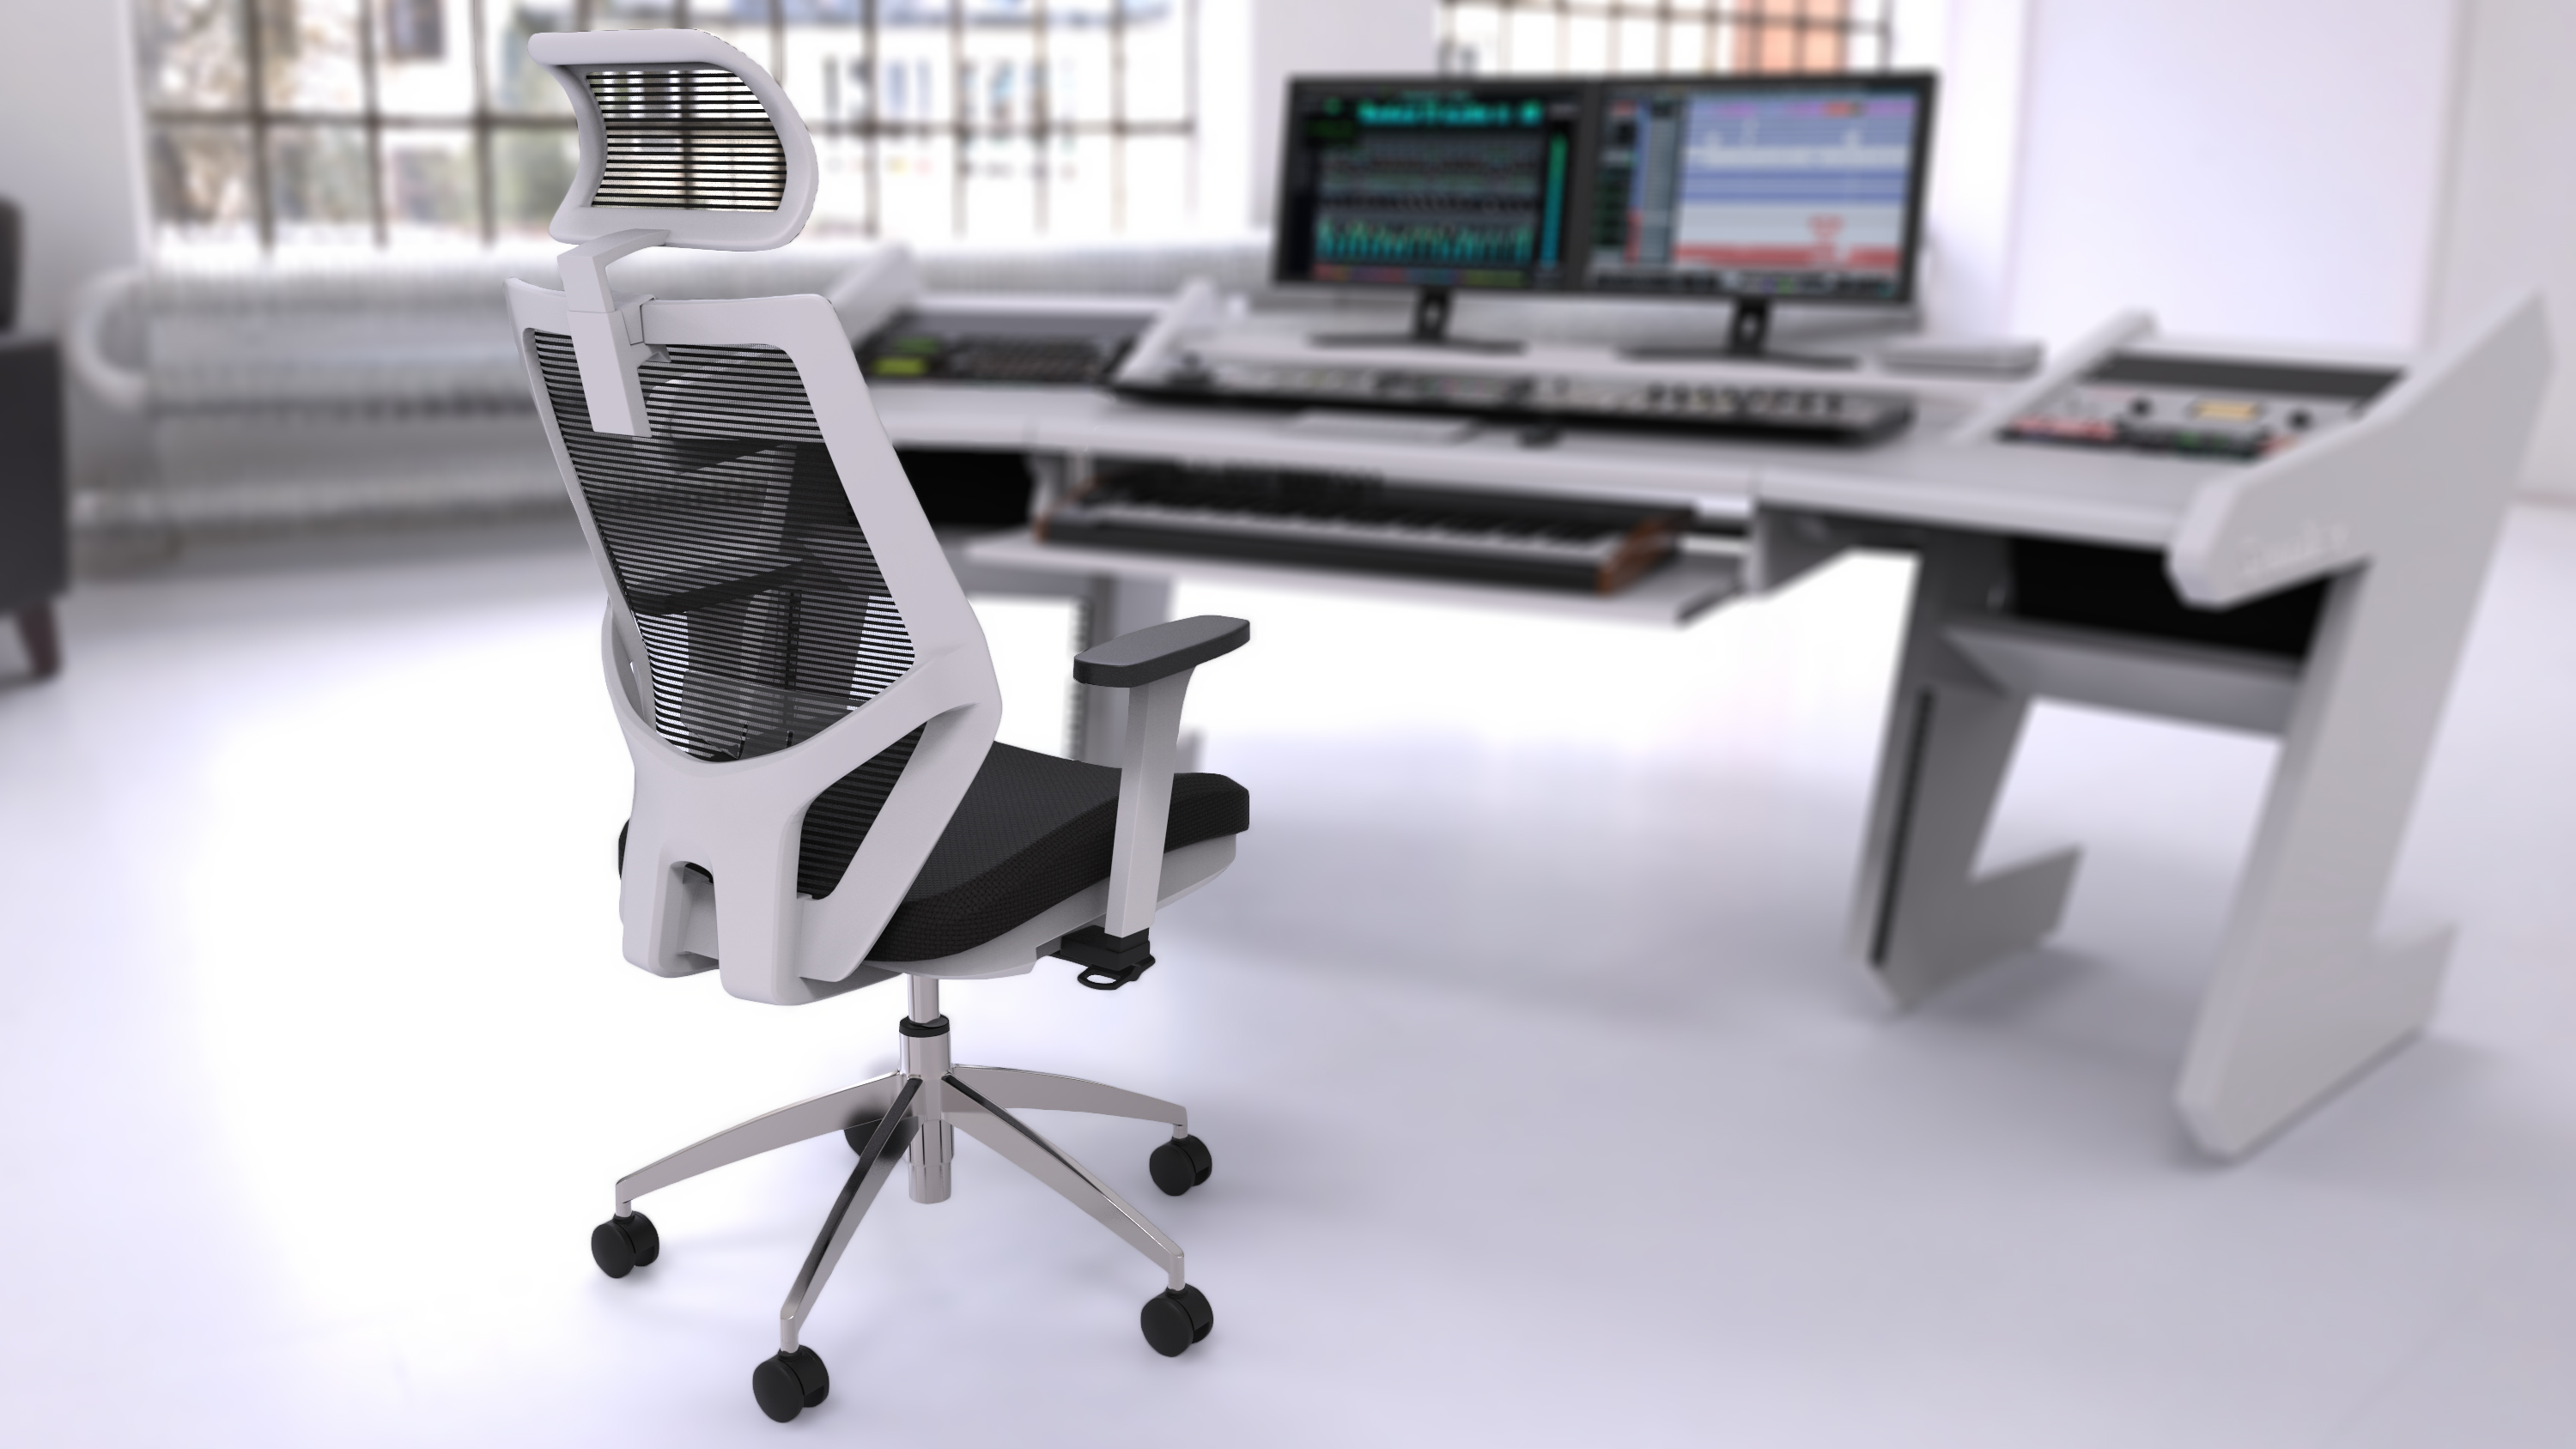 Ergox Made For Long Sessions In Your Studio Studiodesk